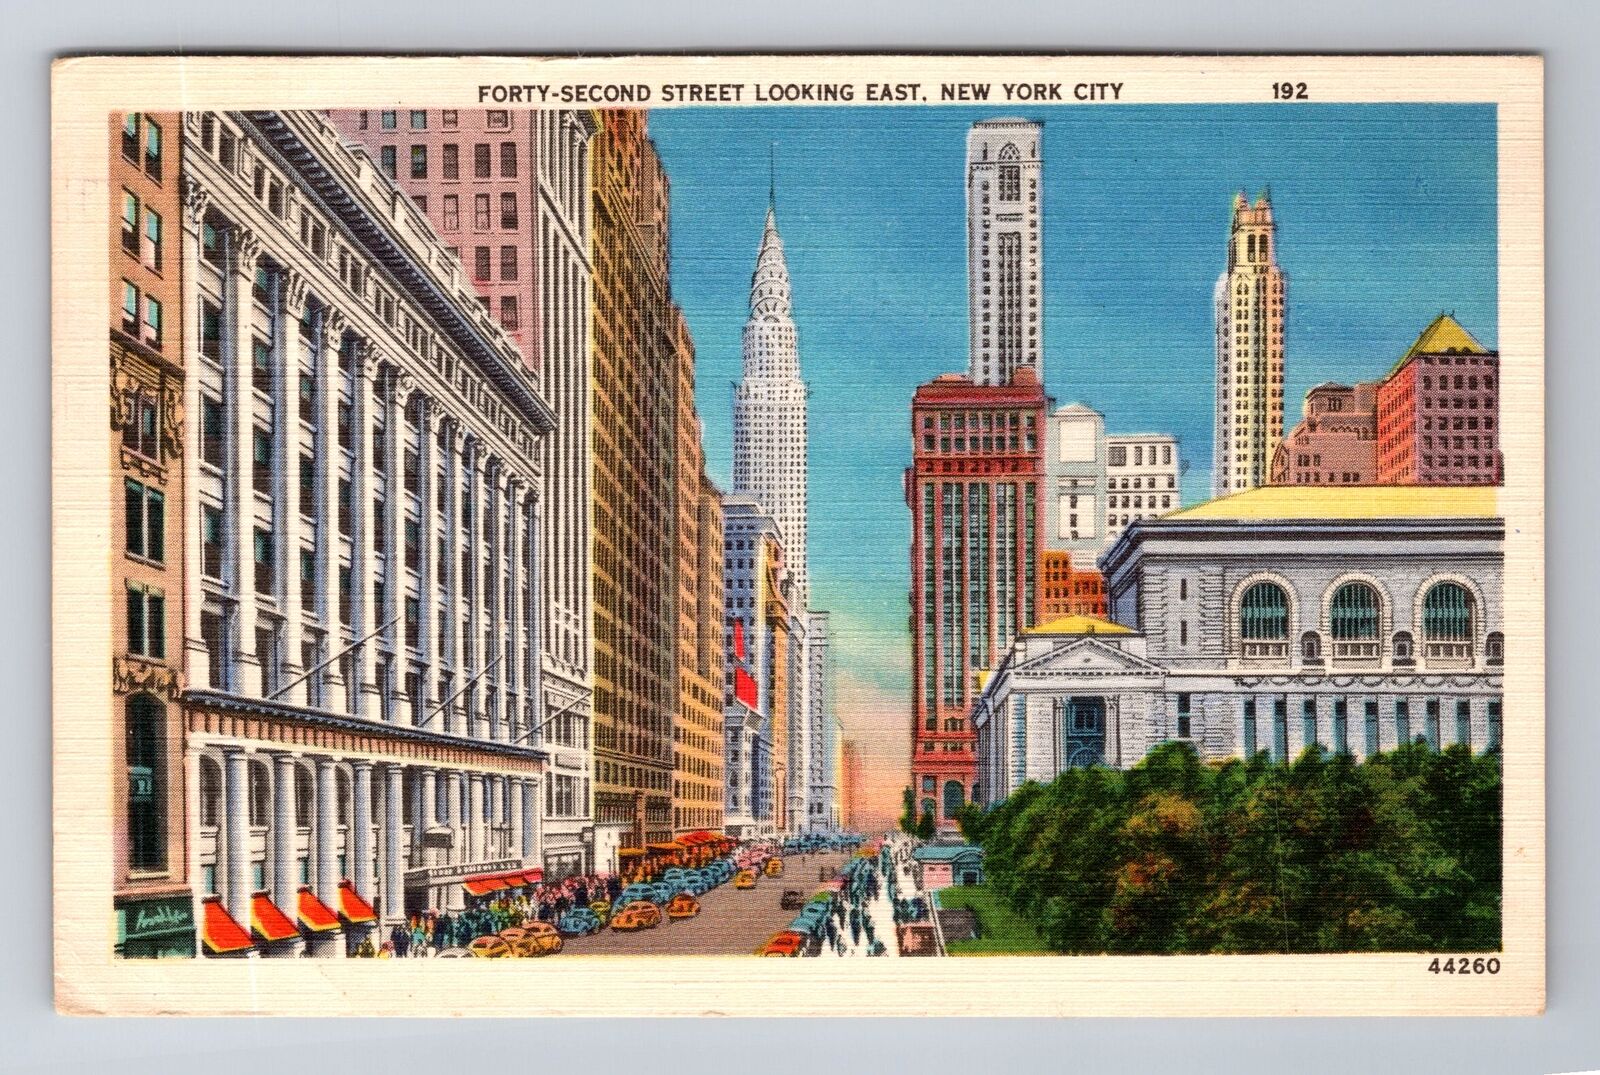 New York City NY, Forty Second Street East, Vintage c1951 Postcard